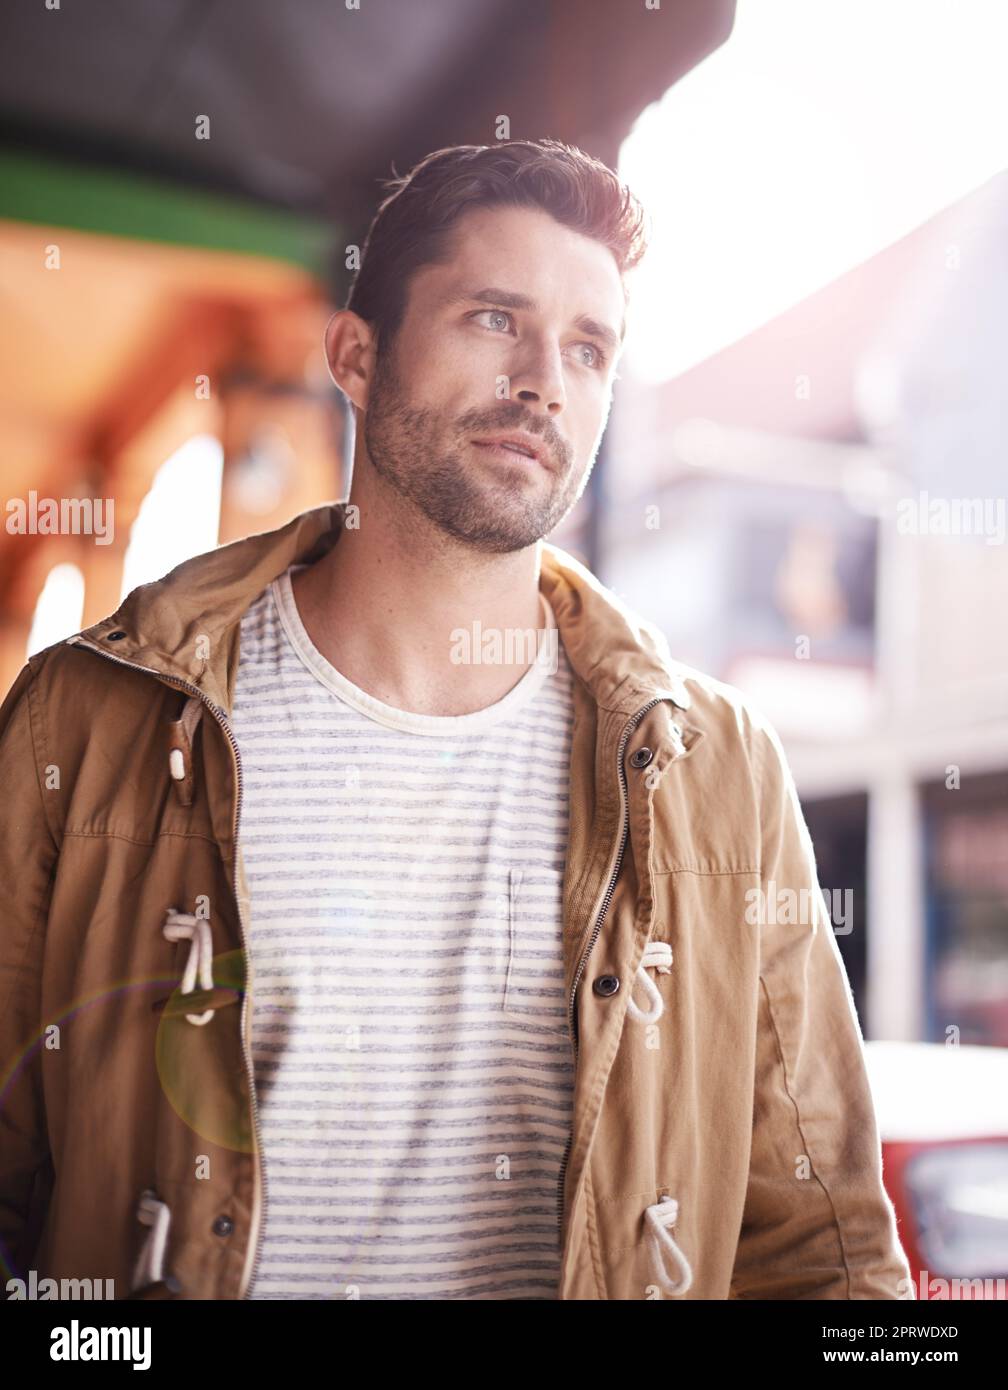 So many things to see. a fashionable young man strolling through the city. Stock Photo